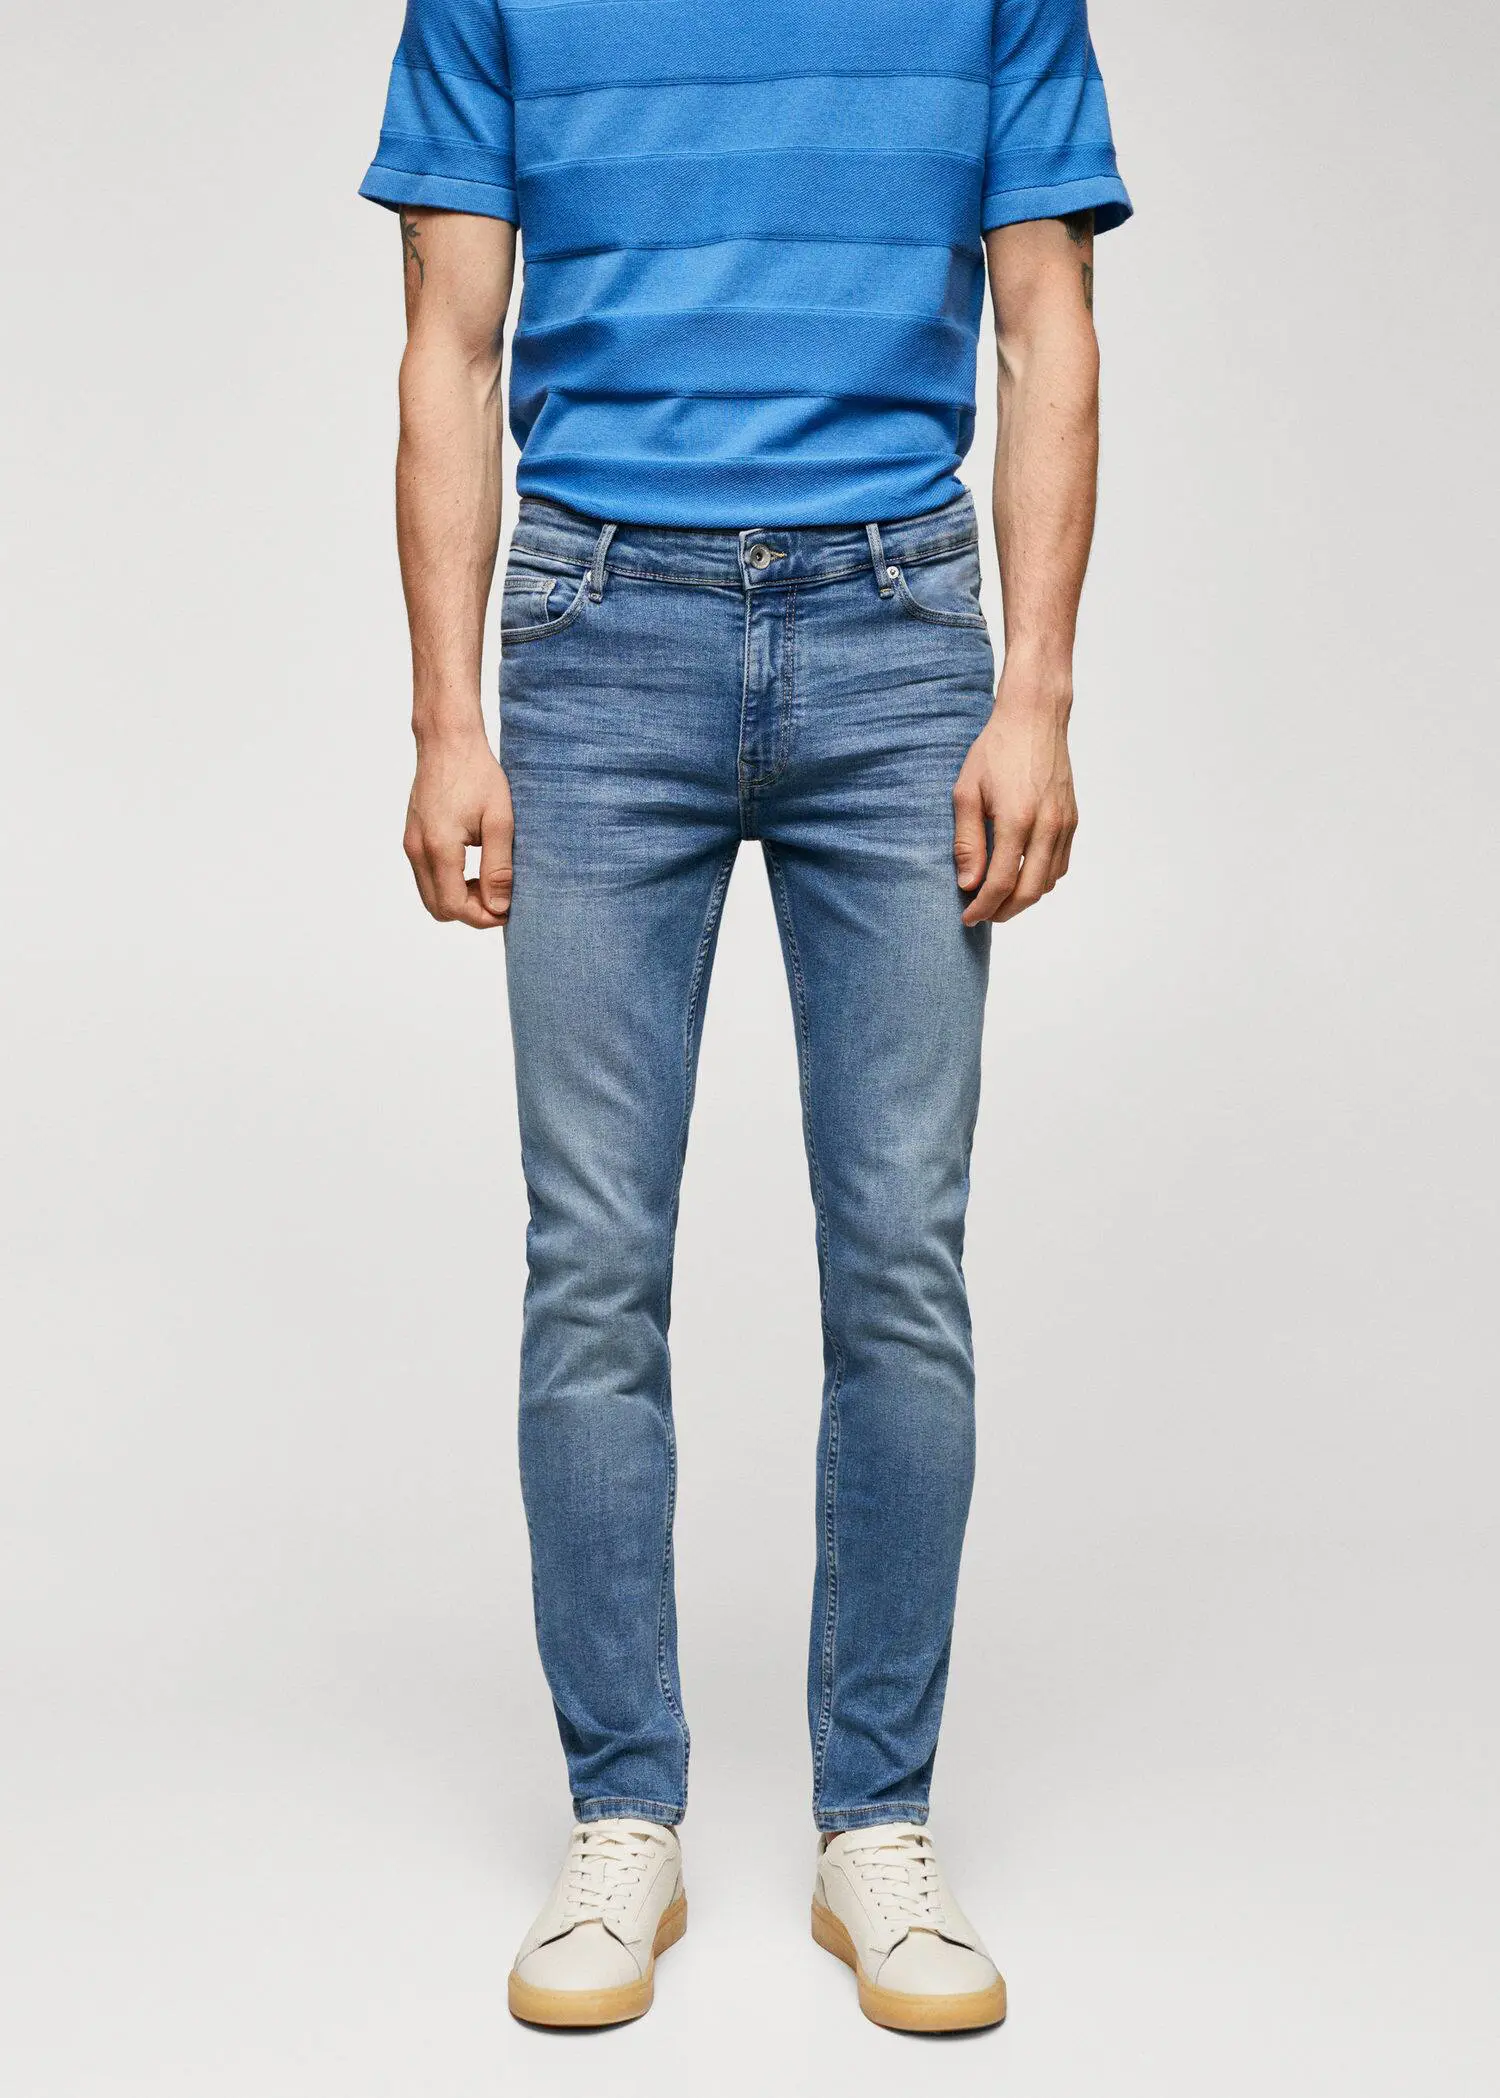 Mango Jude skinny-fit jeans. a man wearing a blue shirt and jeans. 